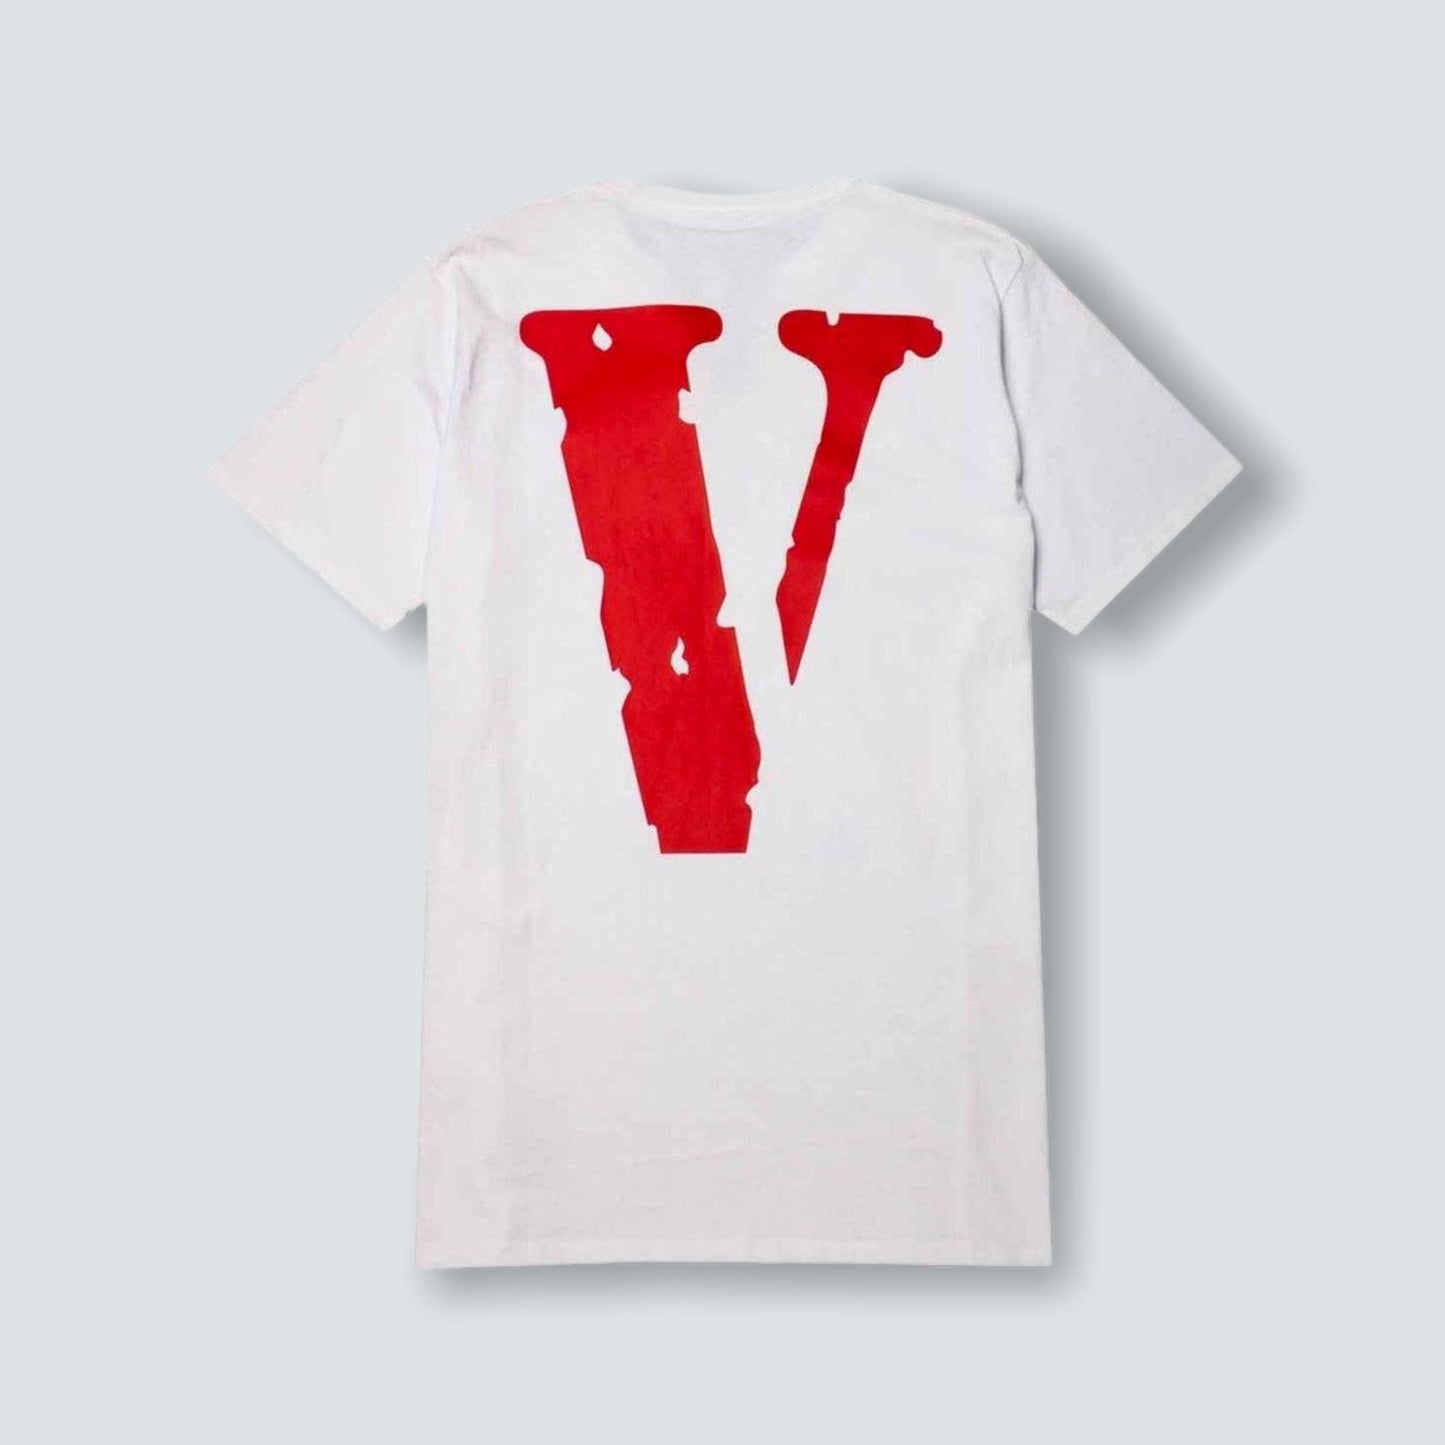 VLONE INDEPENDENCE DAY TEE WHITE/RED (M) - Known Source